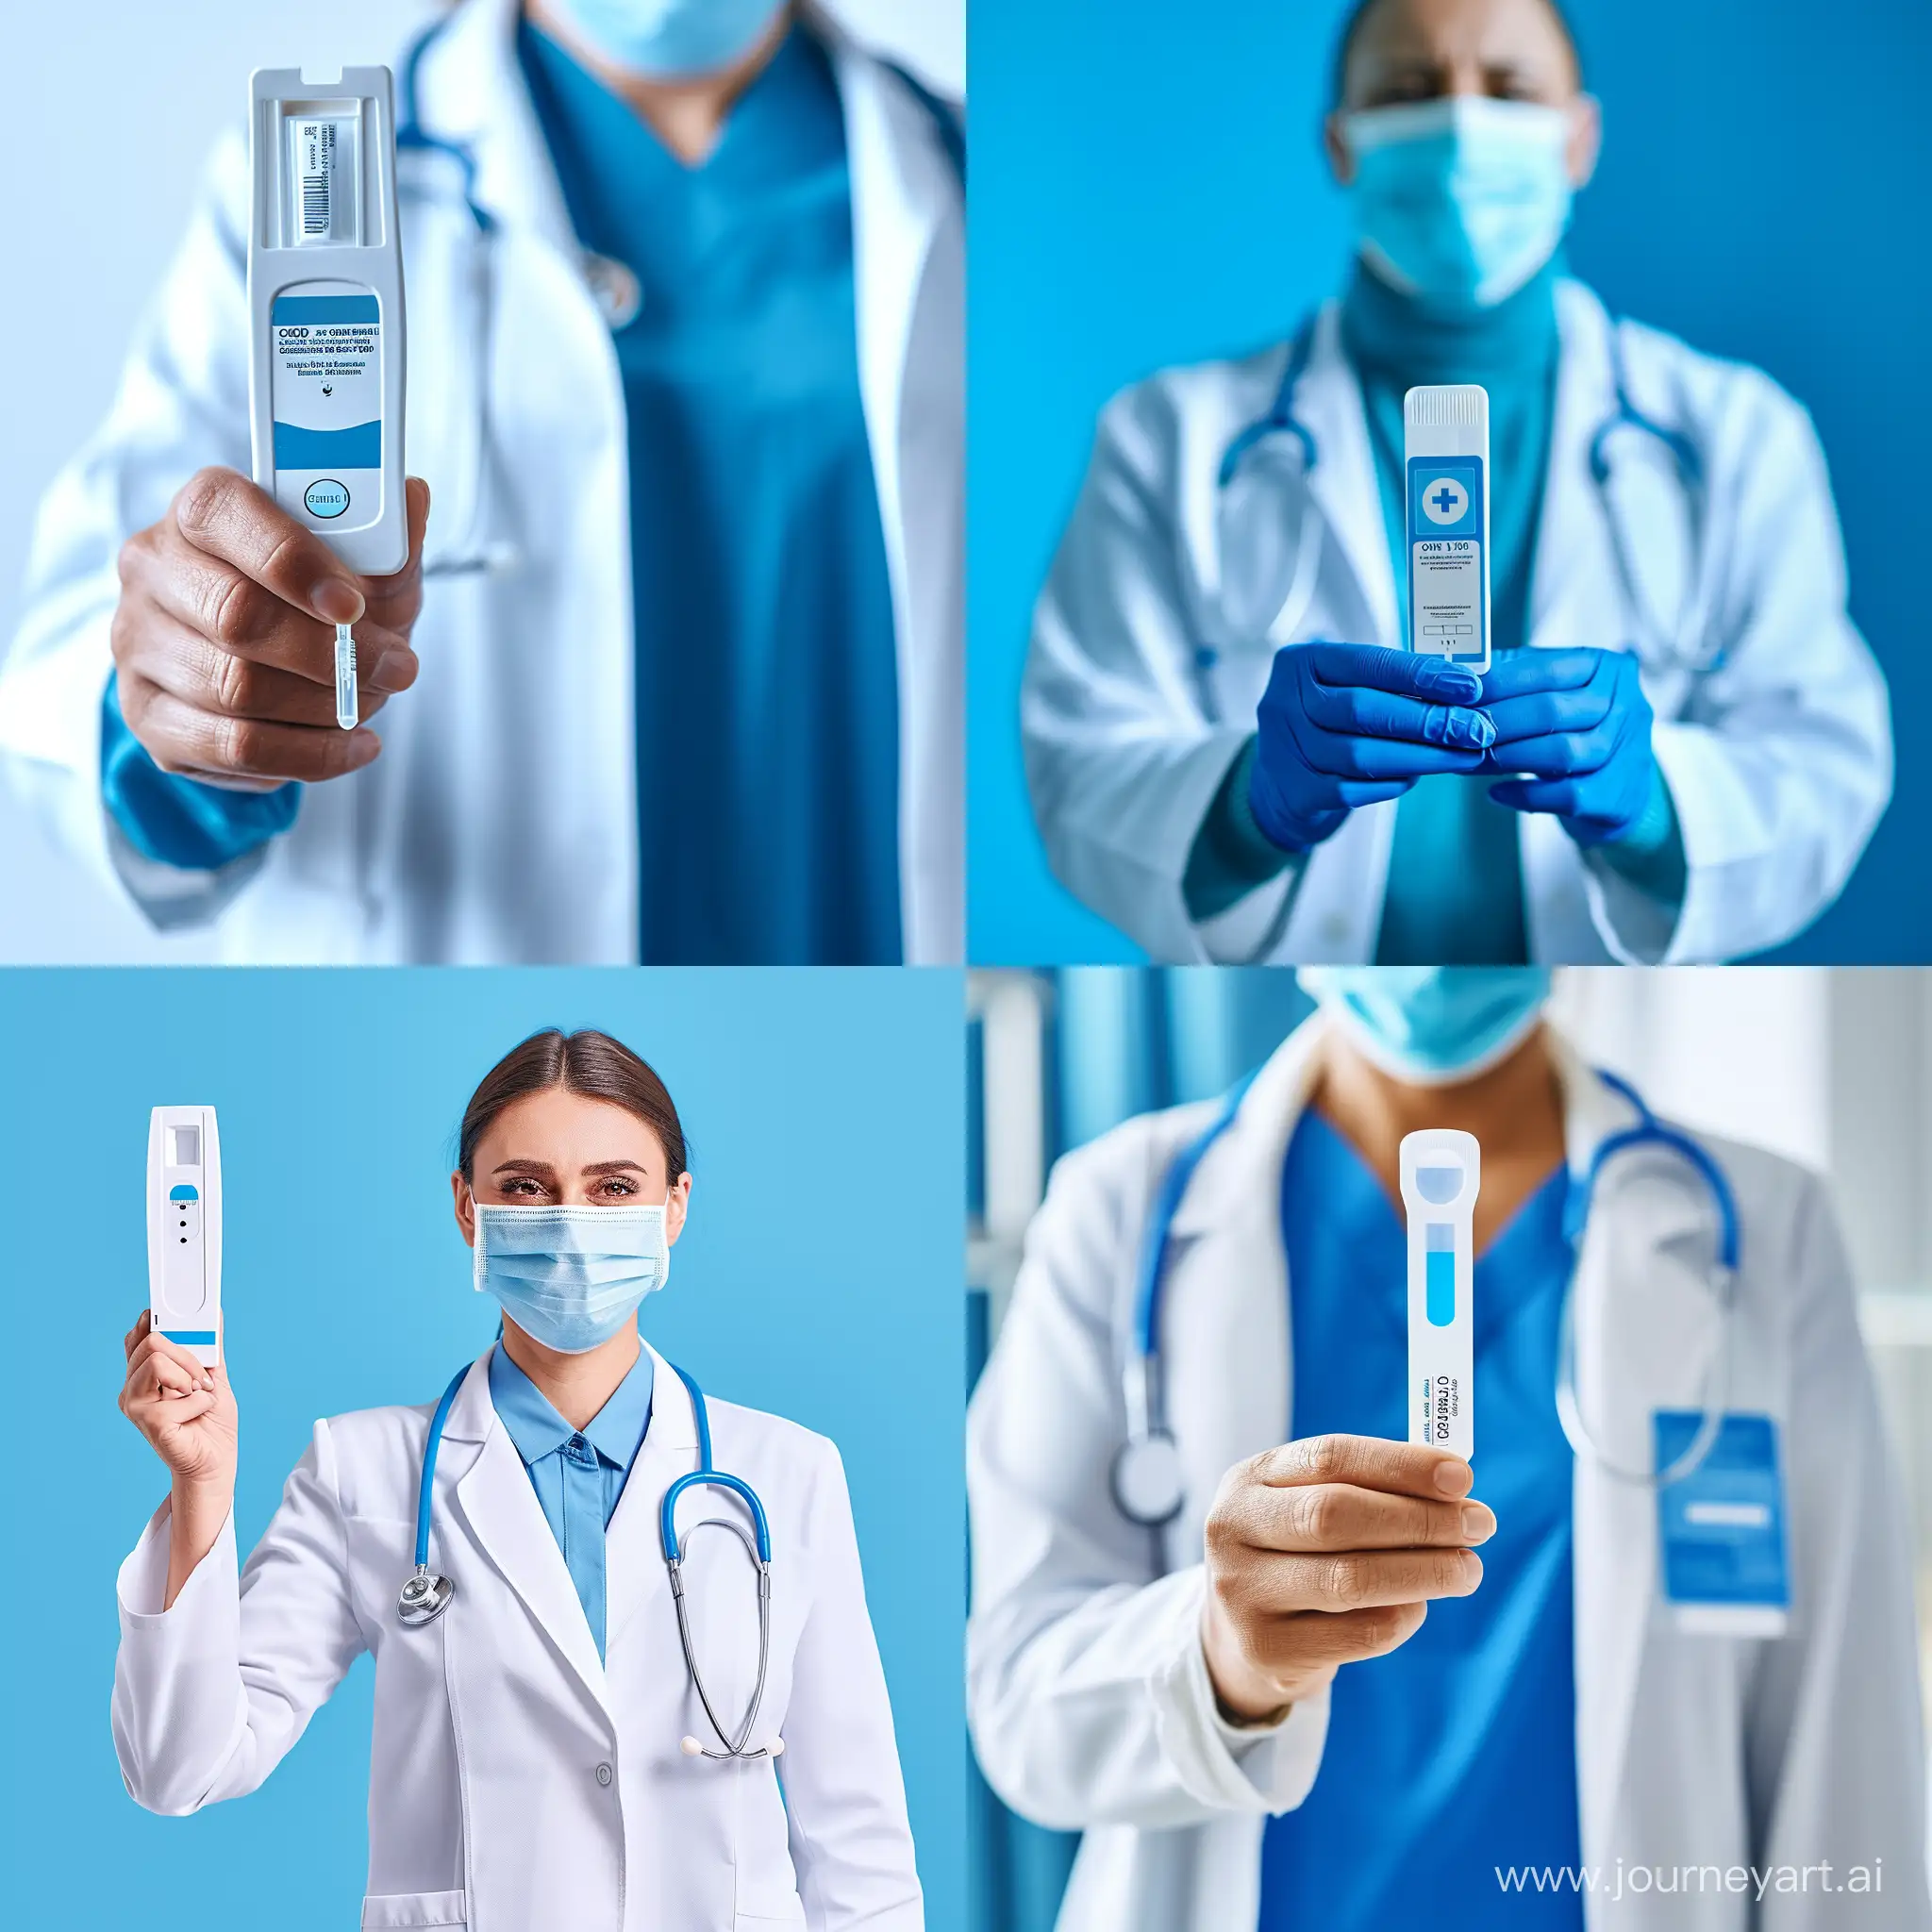 A stock photo of a healthcare professional holding an at-home COVID test kit, symbolizing trust and accuracy, vibrant colors of blue and white, friendly and professional mood. Central composition with negative space on the left for text overlay. Created Using: High-quality photography, professional setting, engaging color scheme, direct and friendly visual approach, HD quality